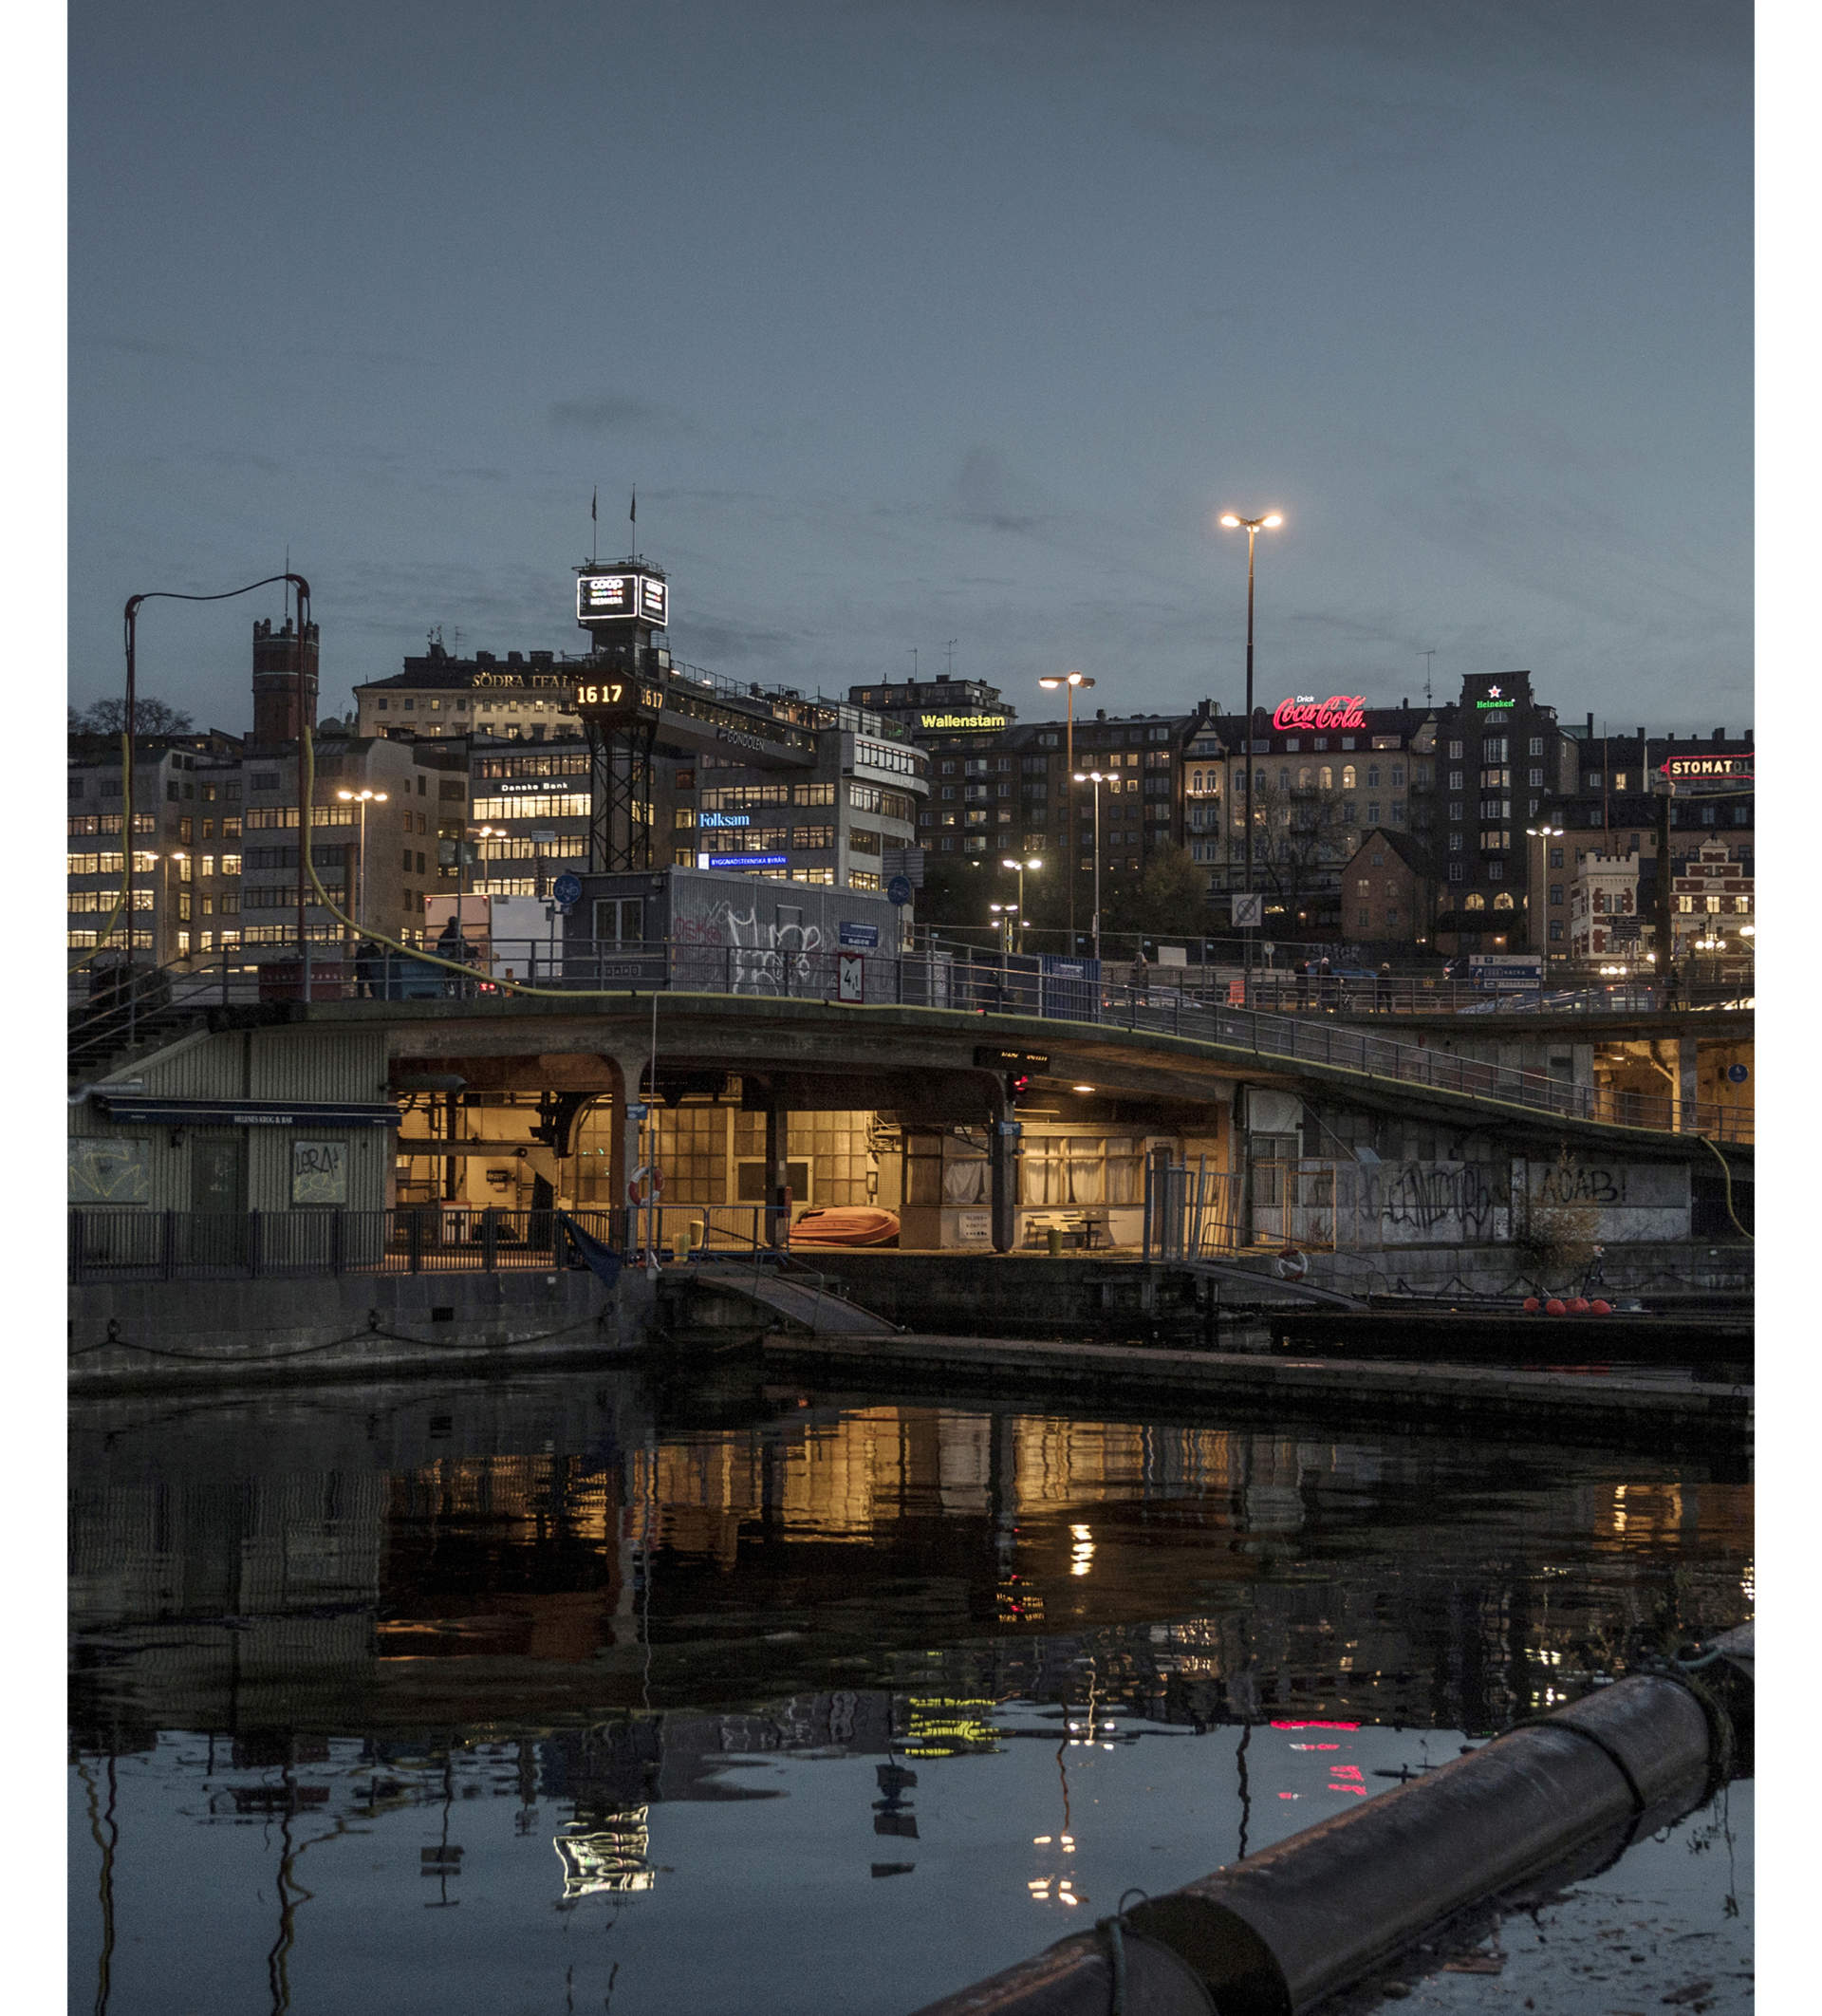 "Slussen" in central Stockholm. Pekka and Matte spends many nights sleeping under the bridge. For a period they called it their home, before they were forced to leave because of heavy construction in the area